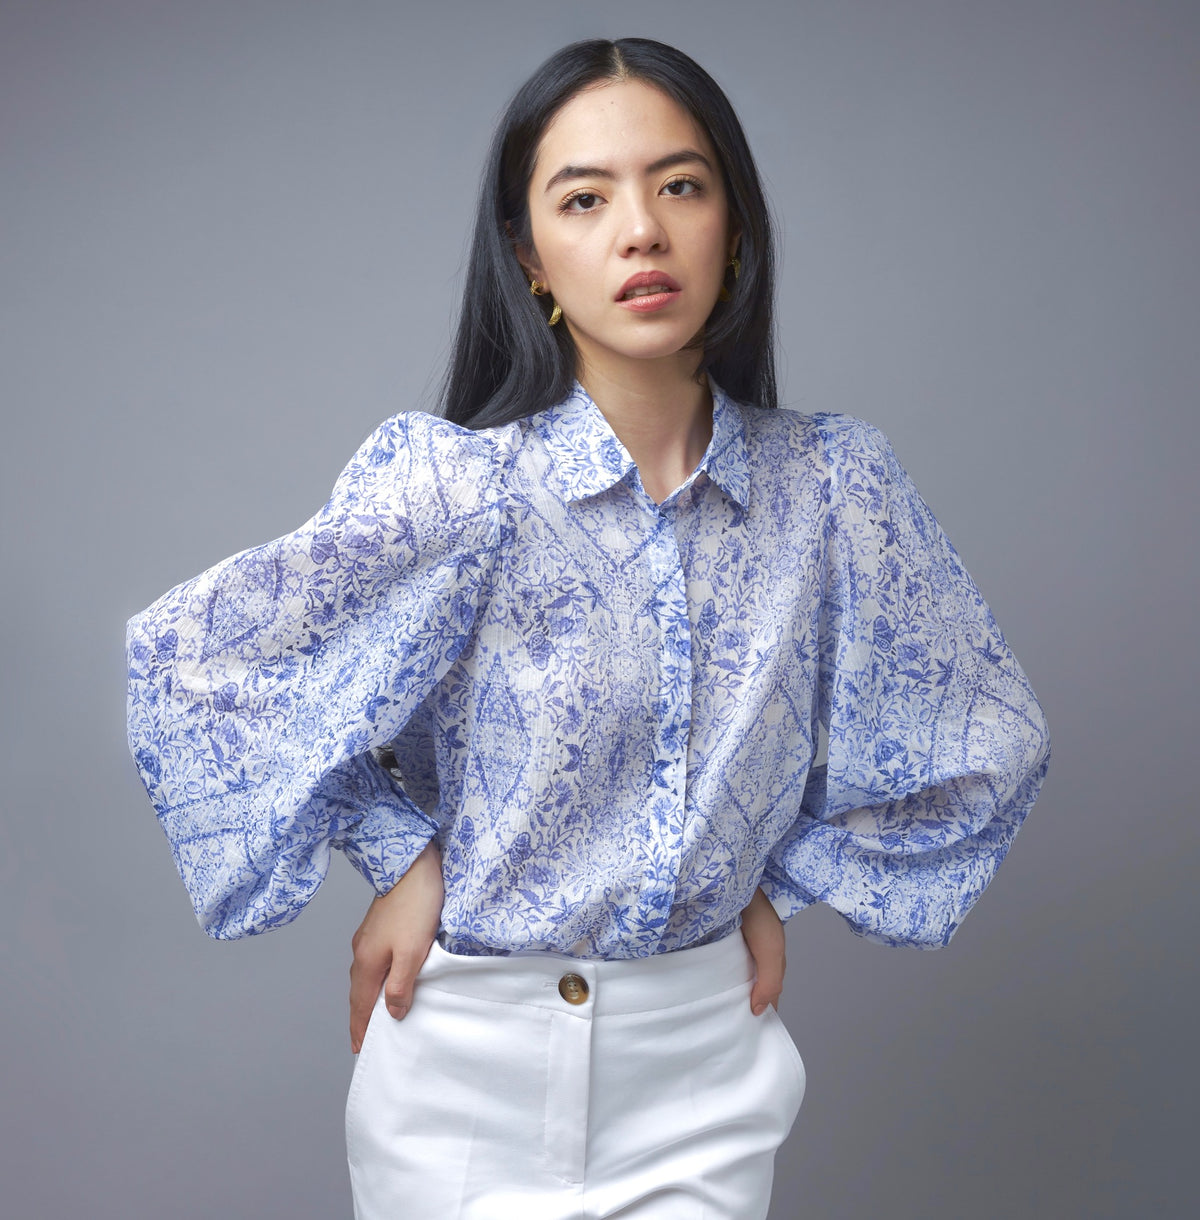 Effotlessly Classic Blue Floral Button-Up Blouse